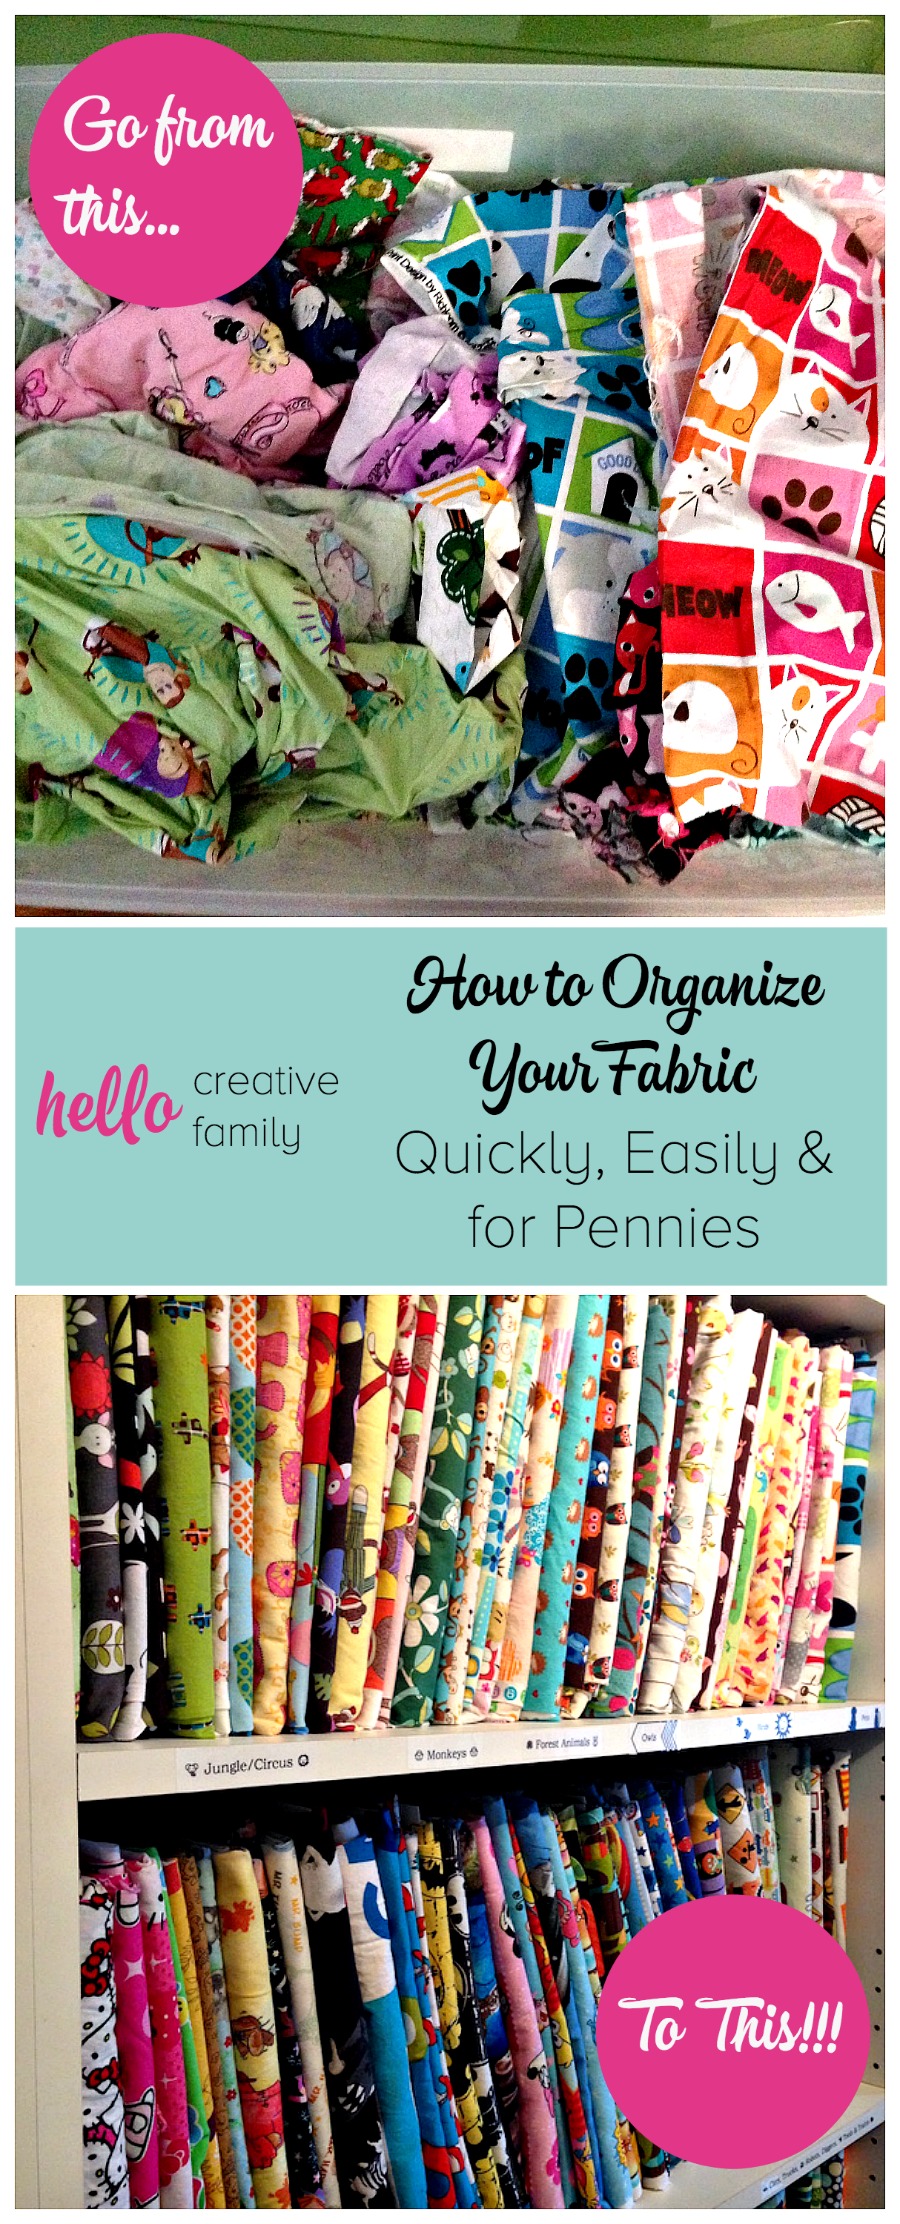 Hello Creative Family Shares With You How to Organize Your Fabric Quickly, Easily and for Pennies Using Comic Book Backing Boards and a Brother Label Maker!